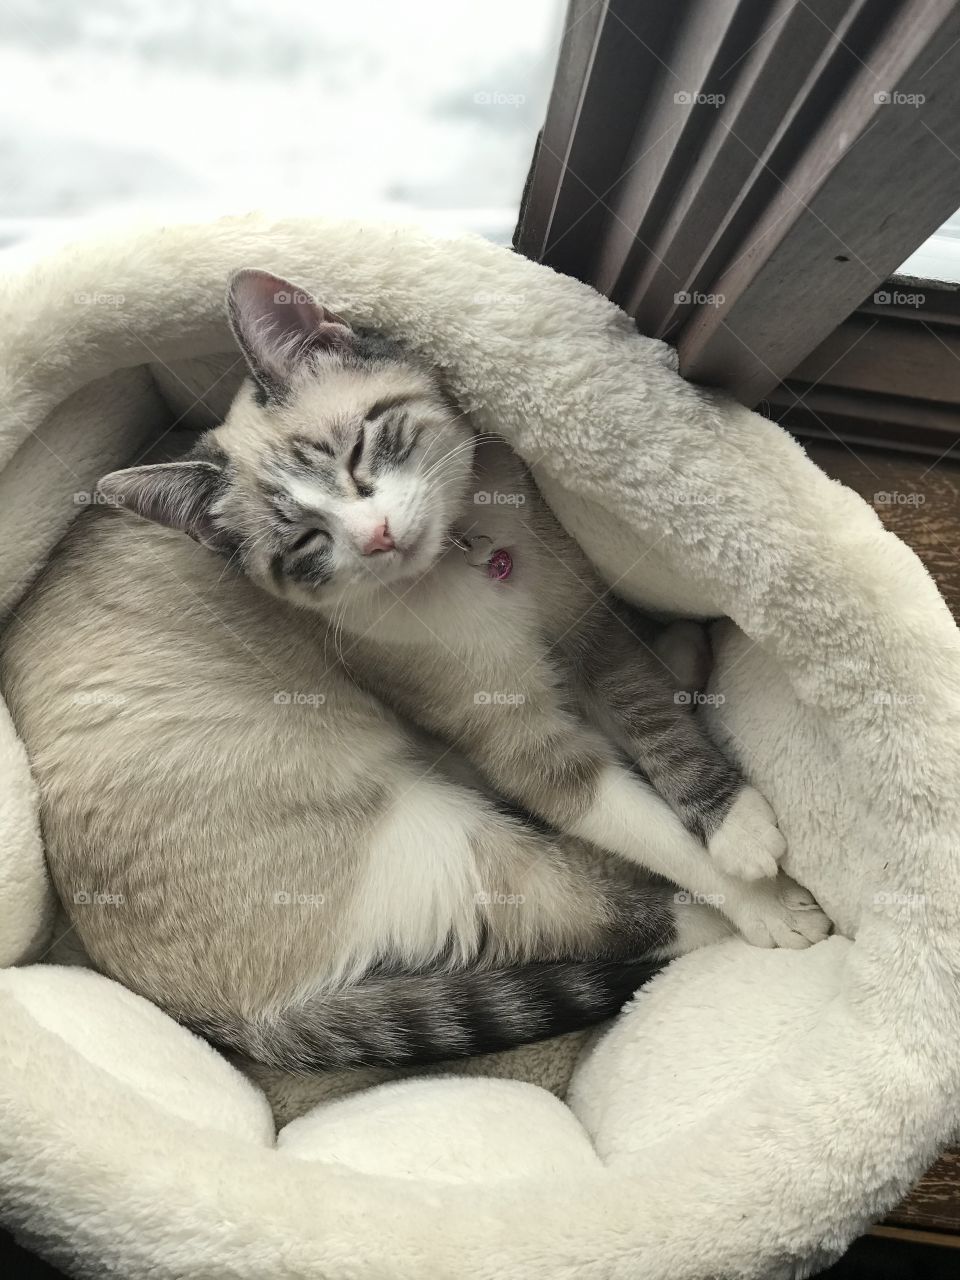 Nap time in her cozy bed!